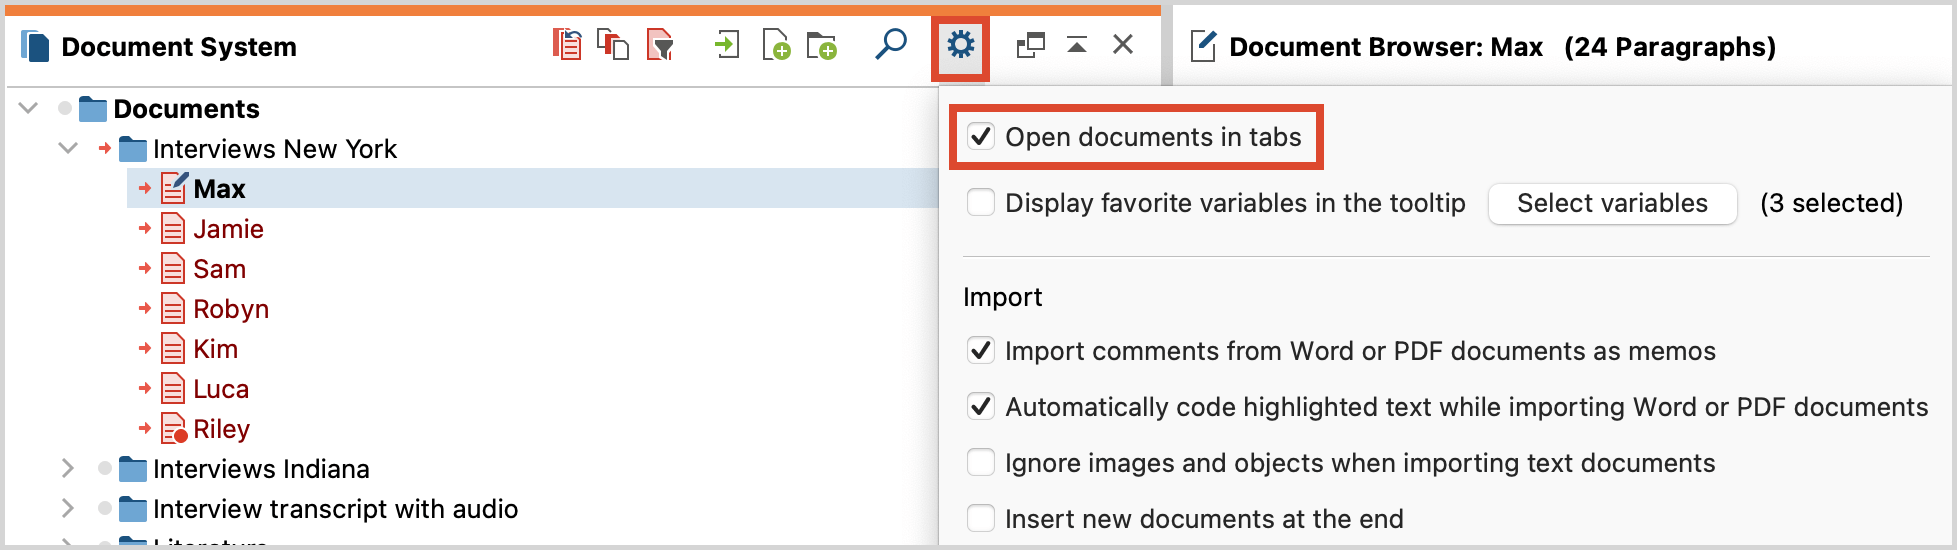 Open documents in tabs by default